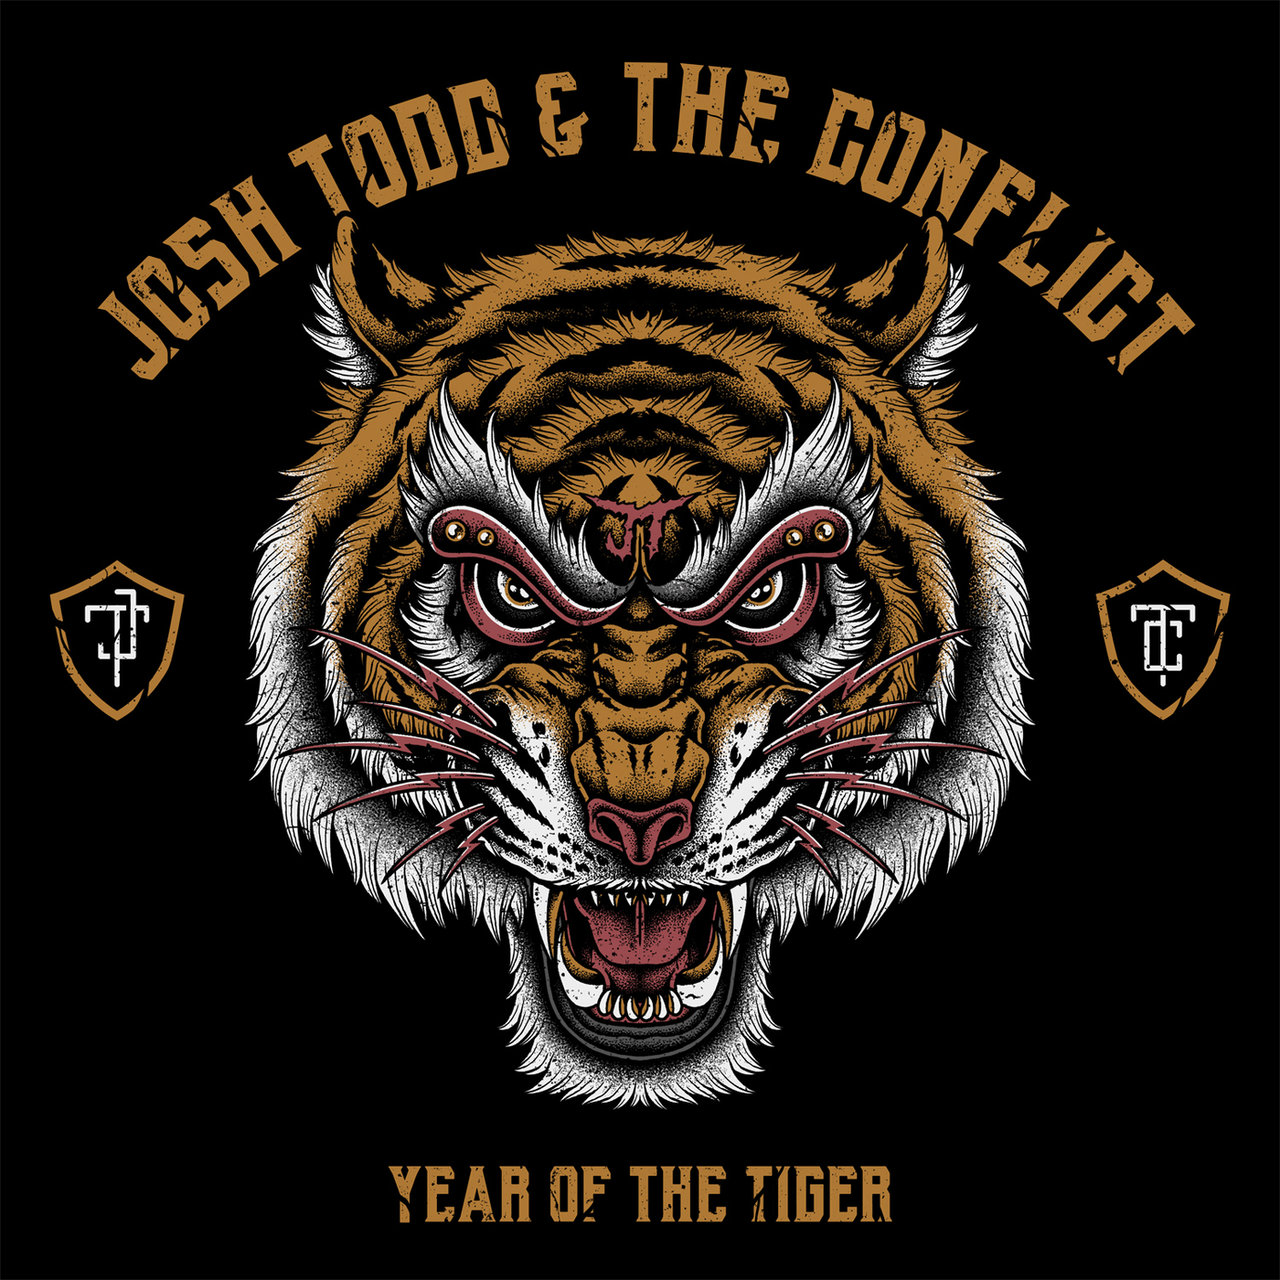 Josh Todd and The Conflict - Year Of The Tiger (2017) (Rock) (mp3)